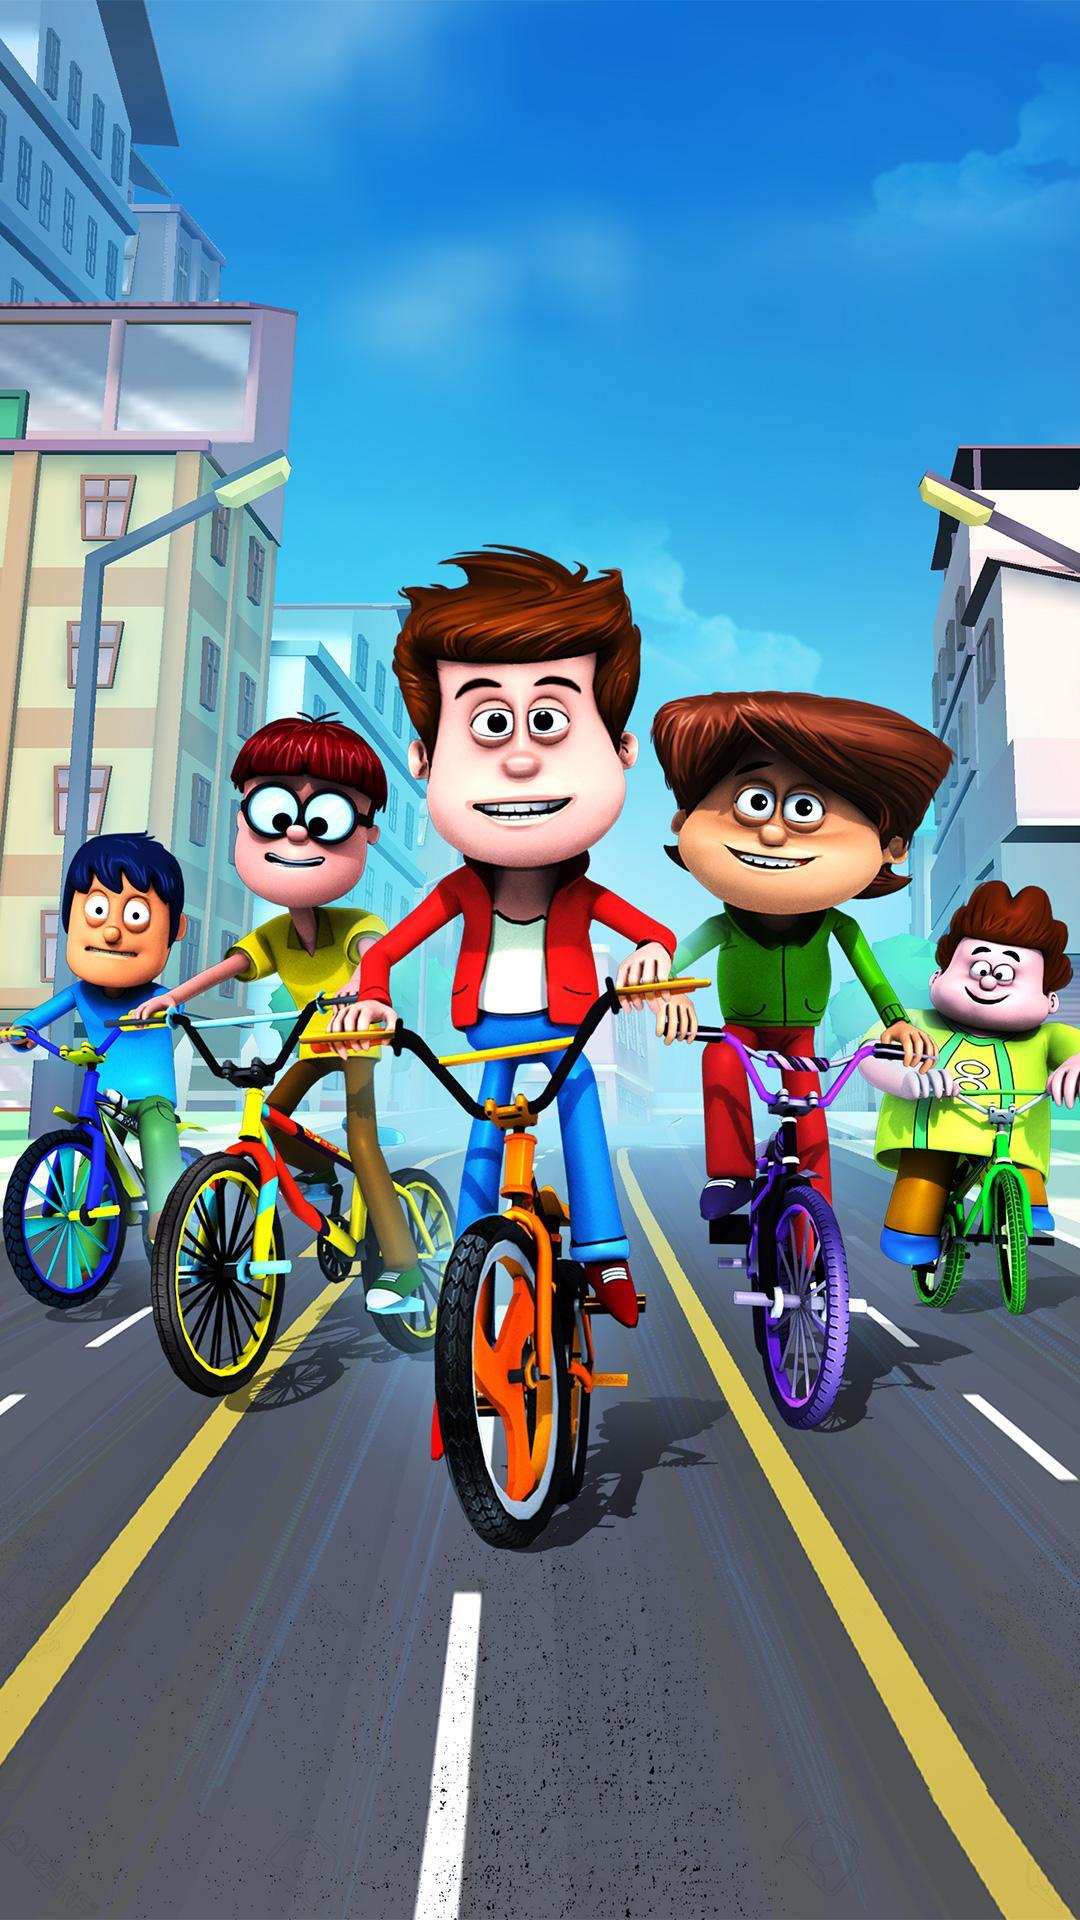 Golmaal Jr. for Android - APK Download